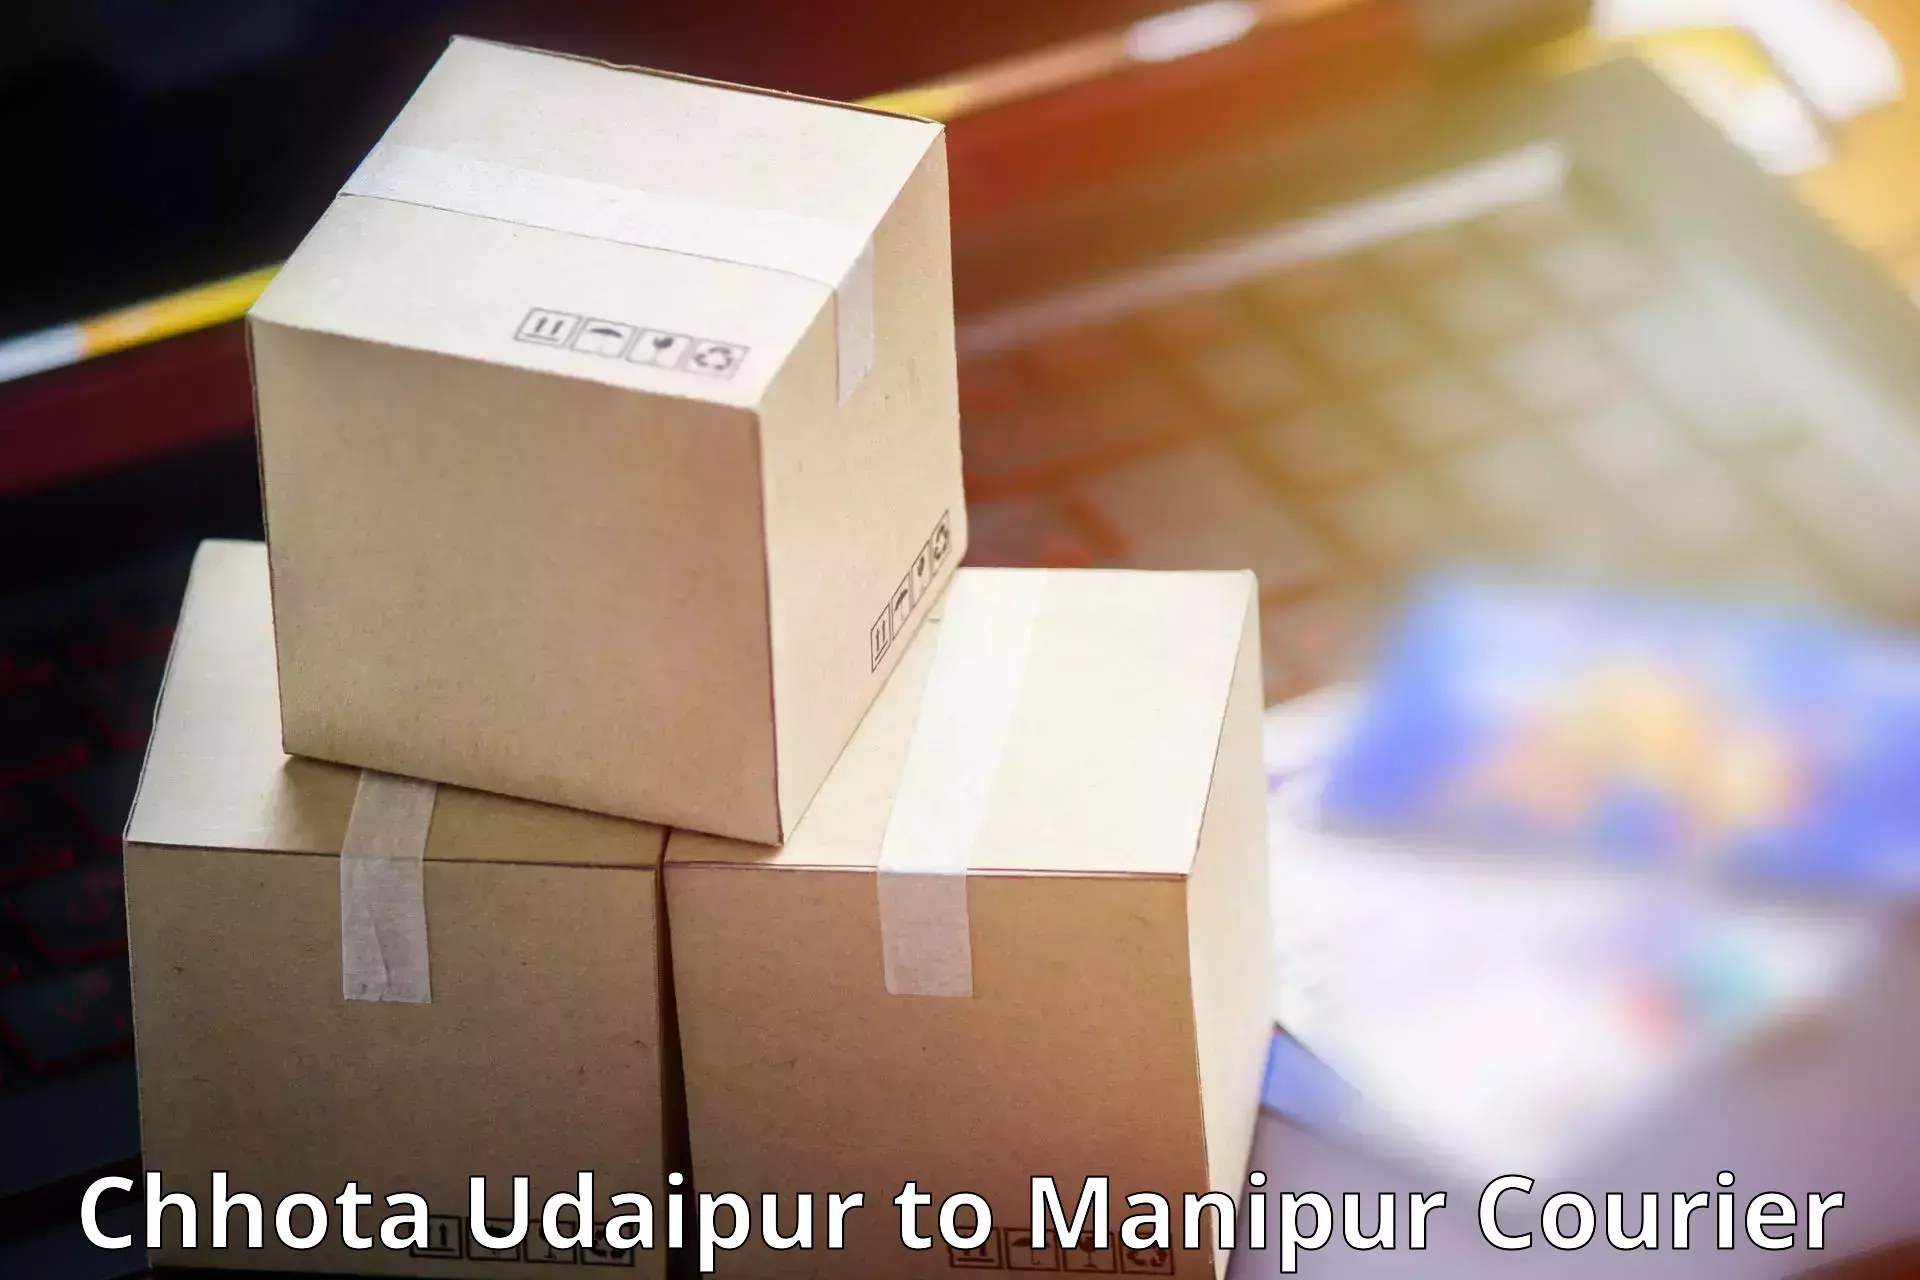 Parcel service for businesses Chhota Udaipur to Imphal